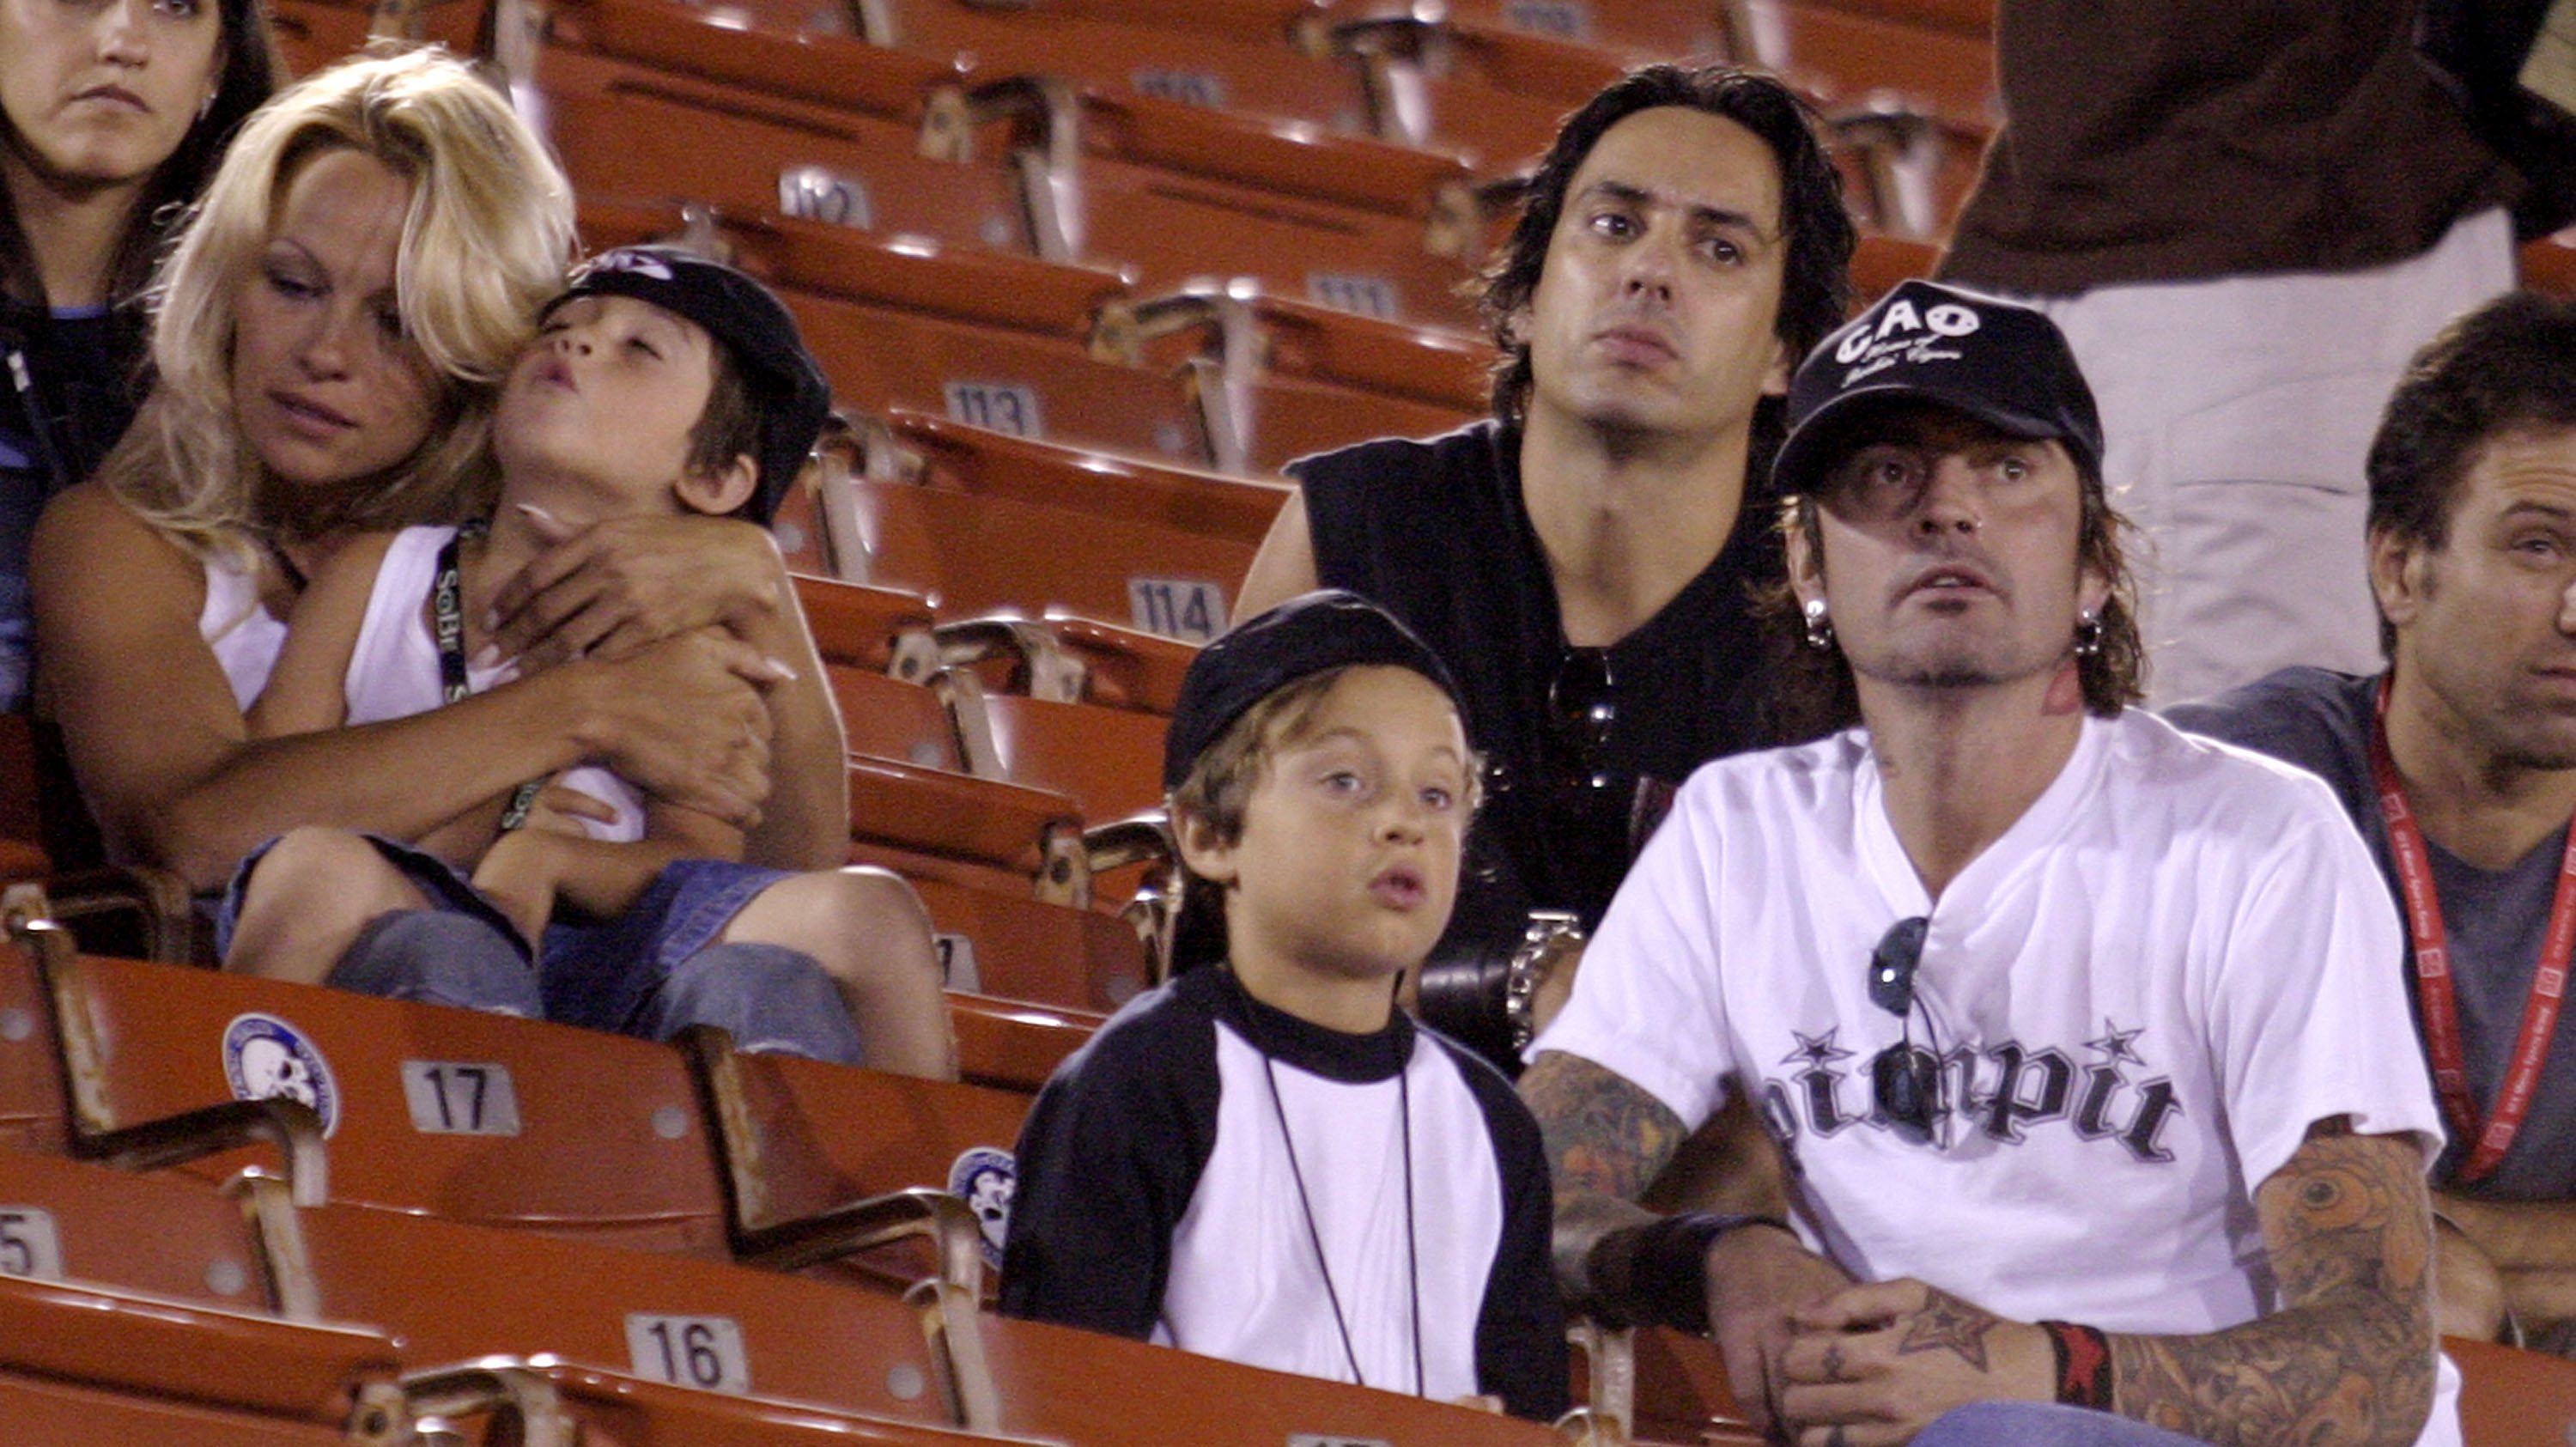 Pamela Anderson, Tommy Lee and family at the X Games - Moto X Freestlye Competition